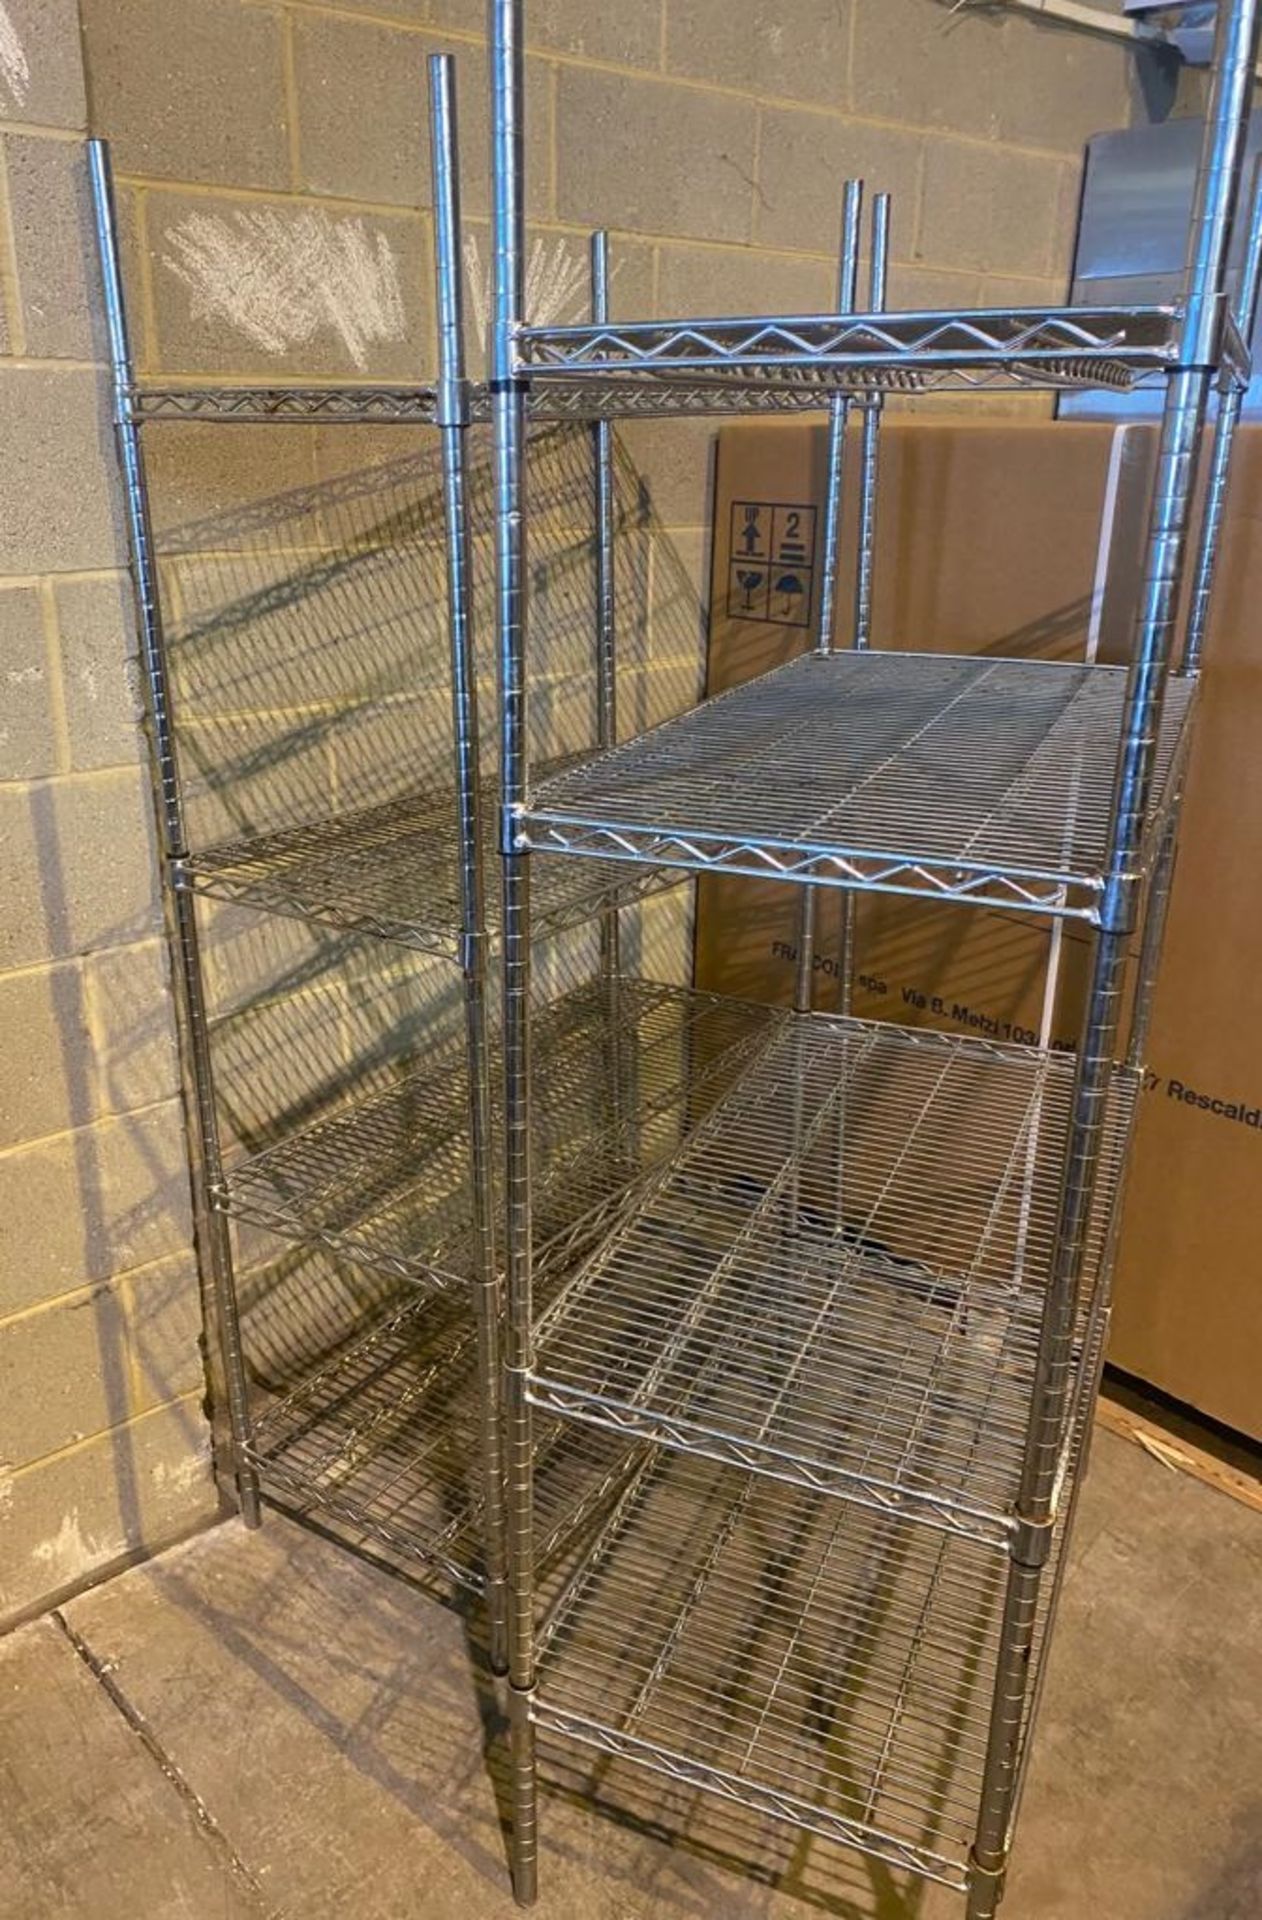 2 x Four Tier Wire Storage Shelves For Commercial Kitchens - Image 4 of 5